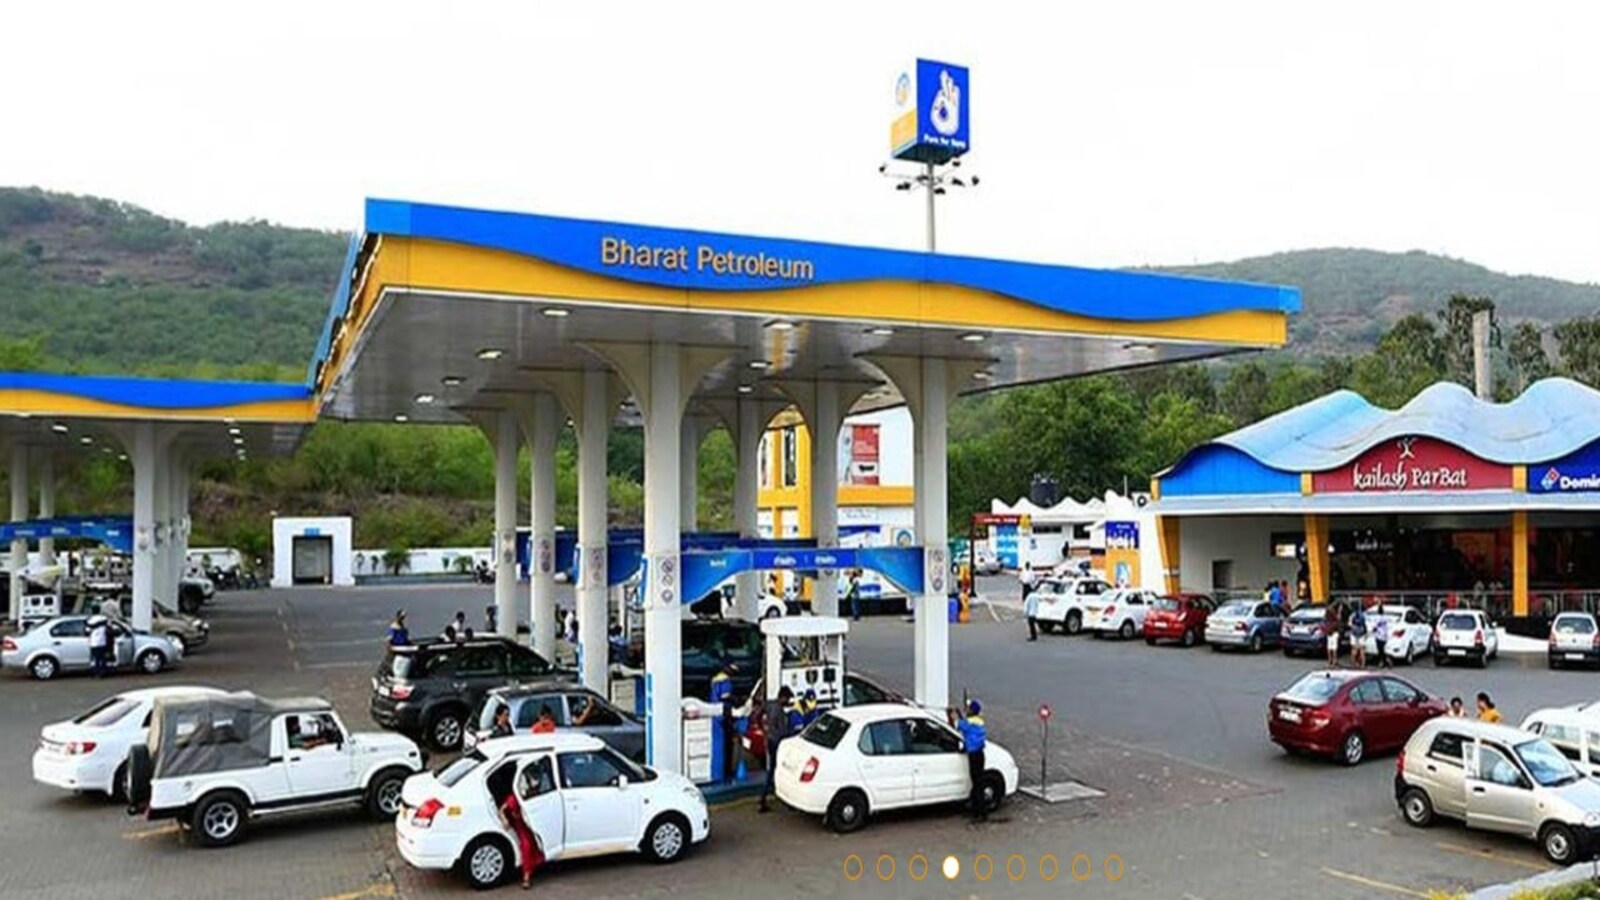 Bharat Petroleum’s Enormous Visionary Expansion Strategy Driving